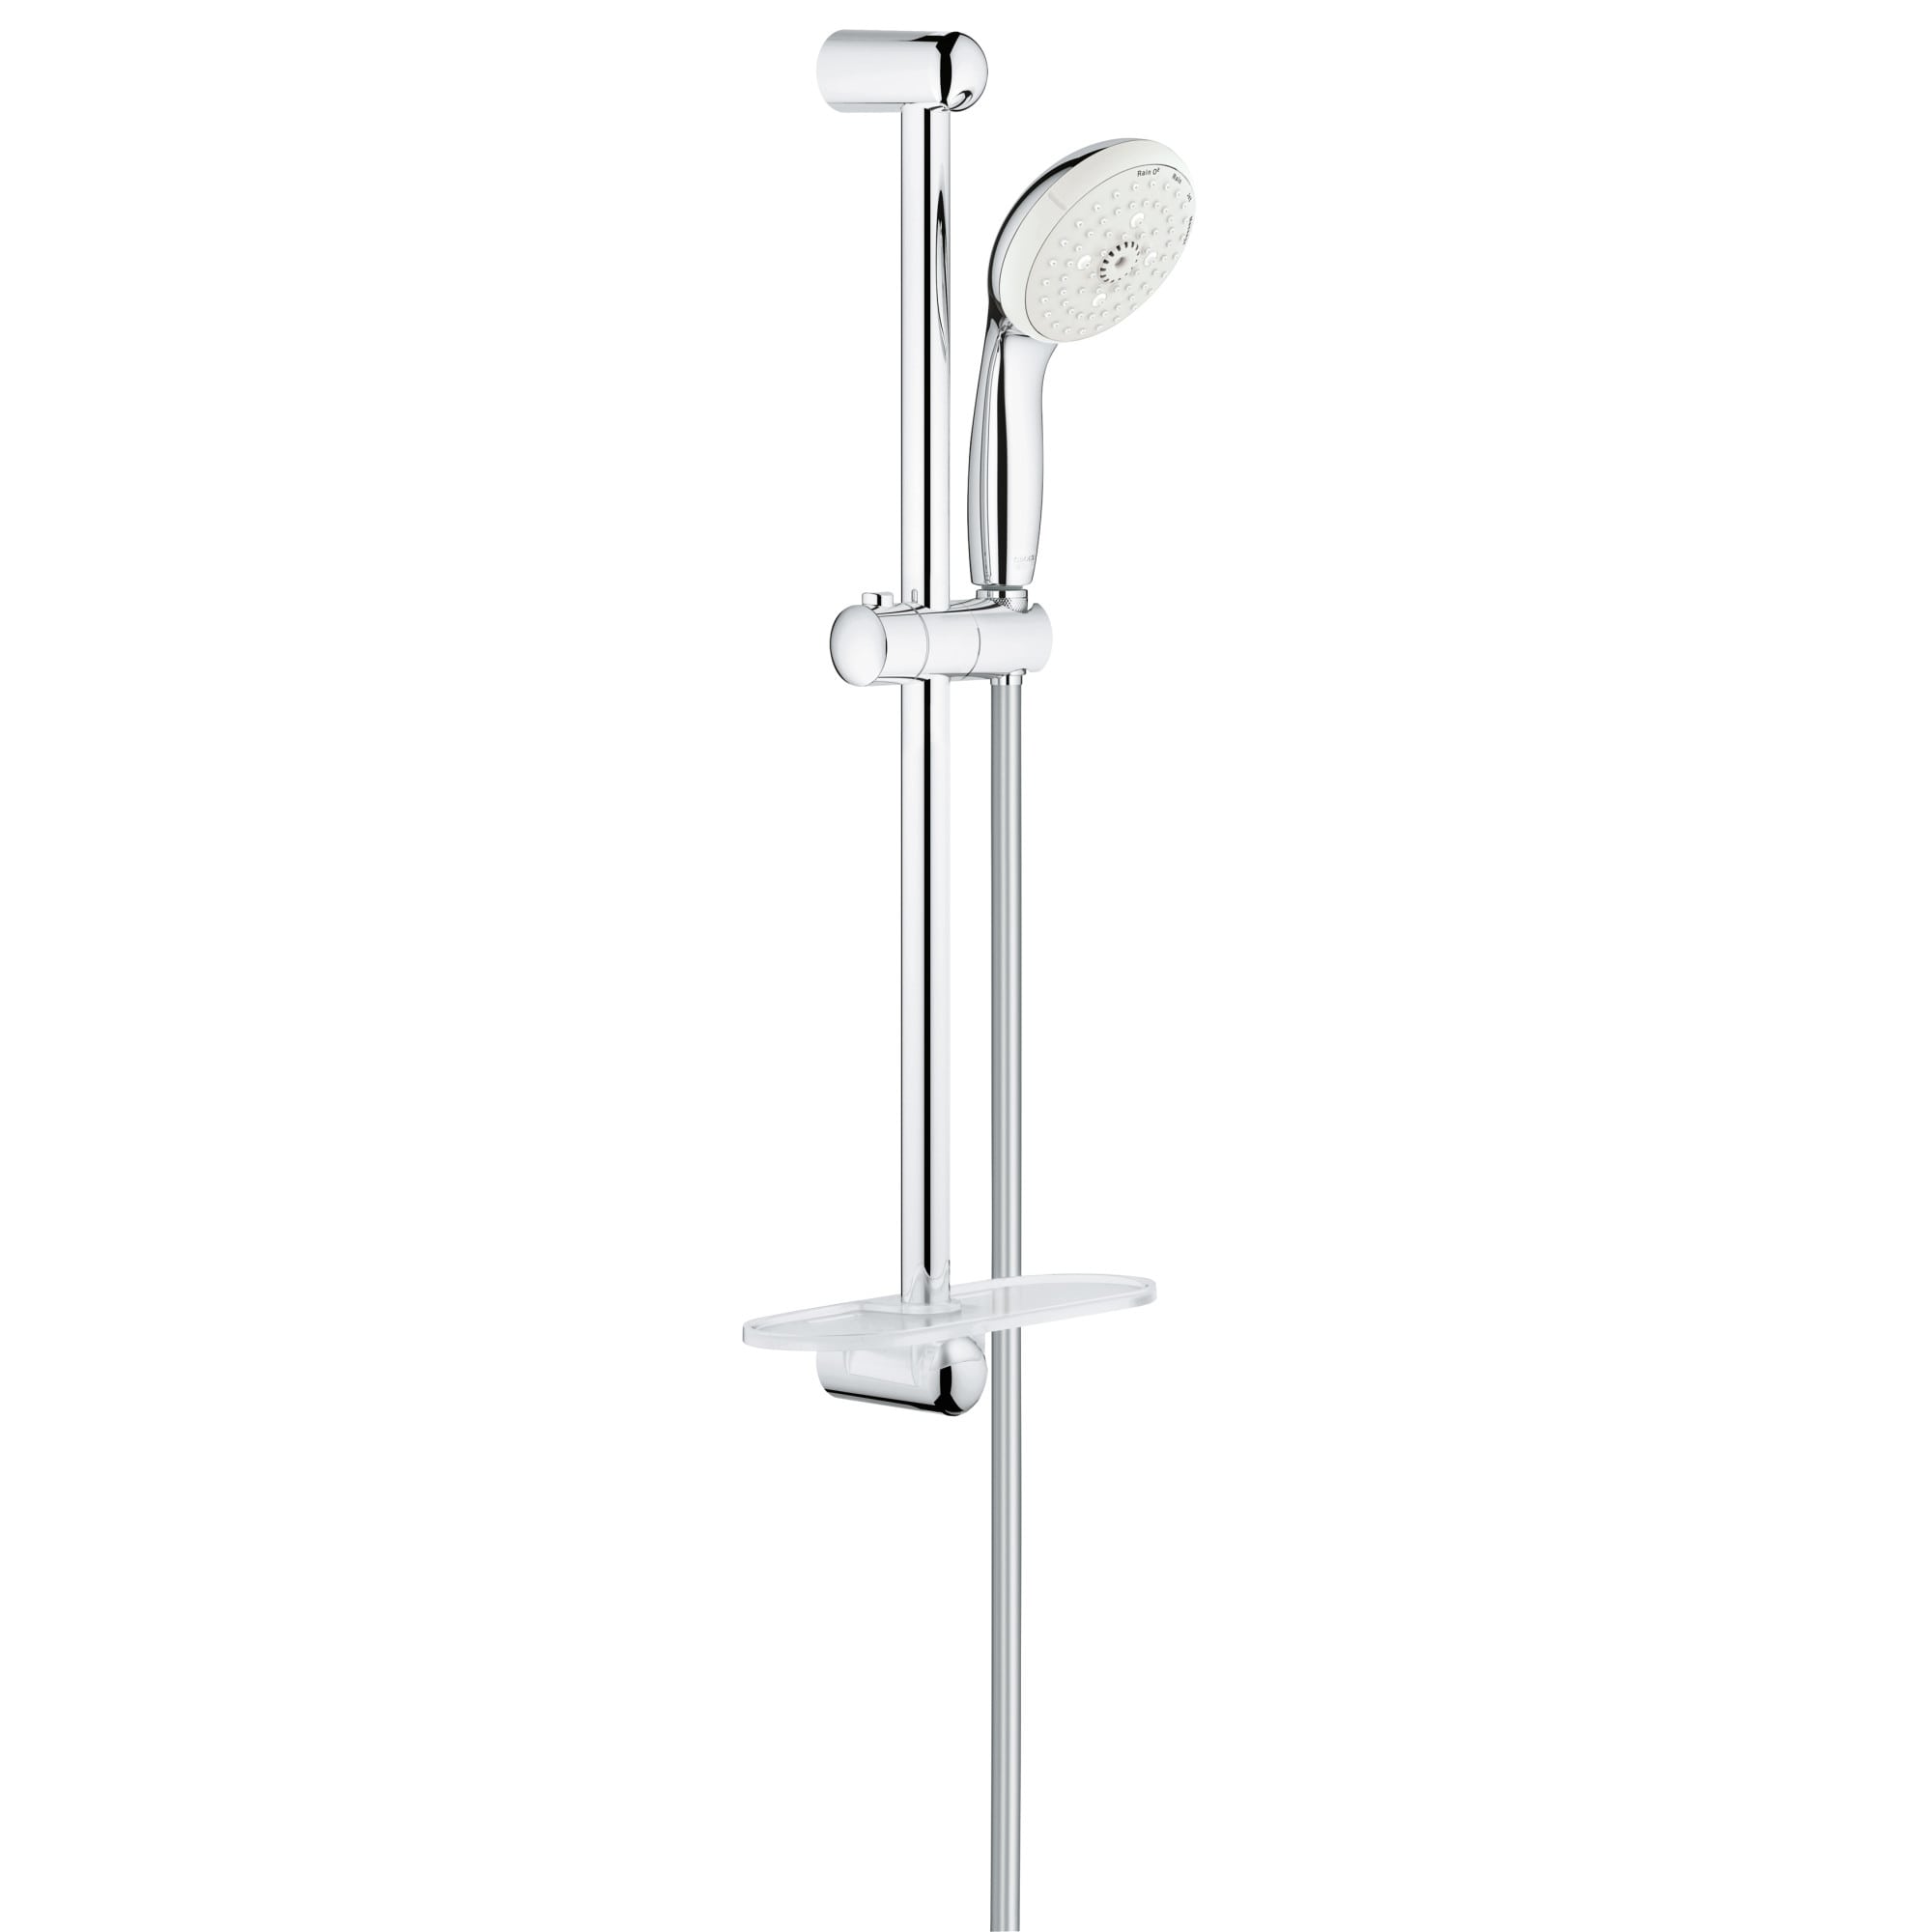 GROHE 28421002 Chrome Tempesta 2.5 GPM Multi Function Hand Shower #4142 Z57 B19 for sale online 